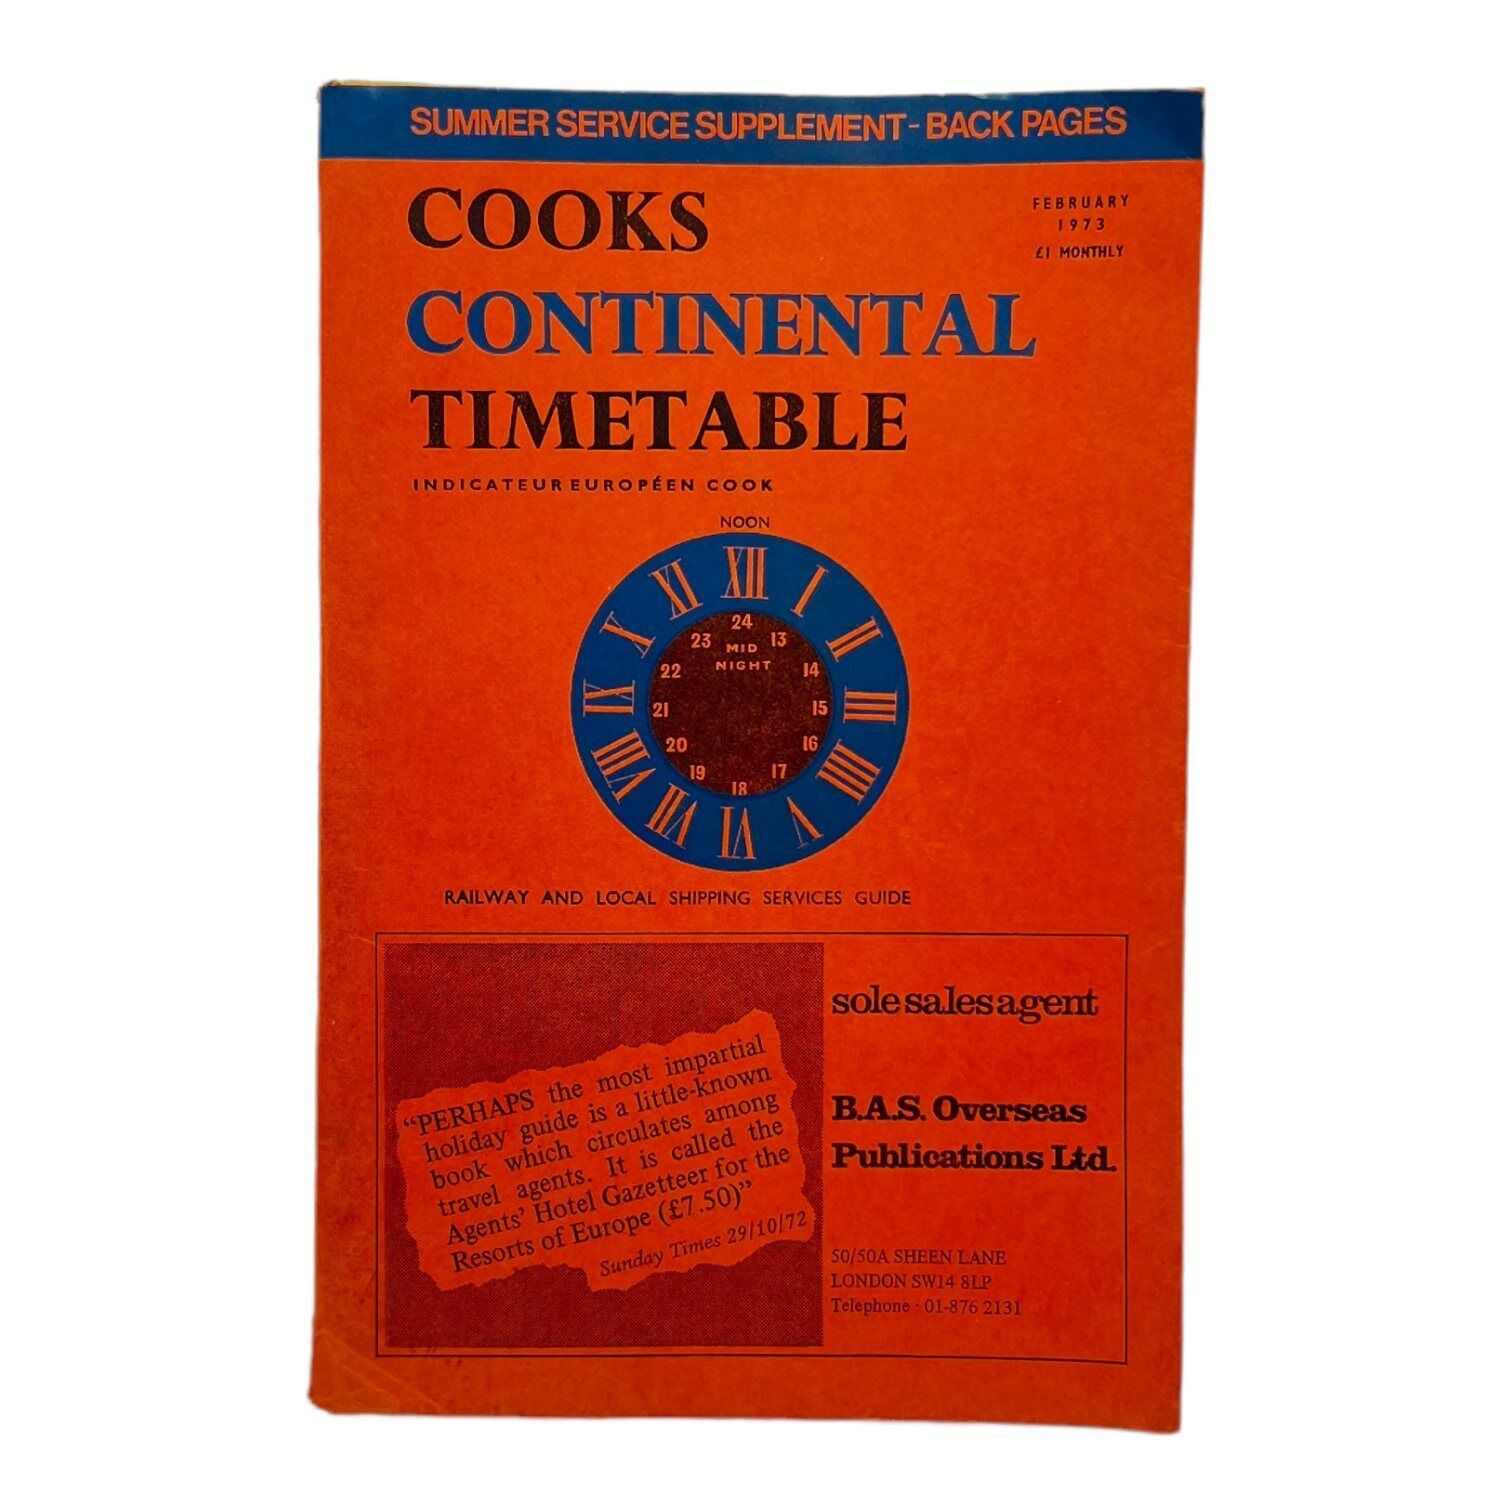 February 1973 Thomas Cook Continental Railway & Local Shipping Services Guide